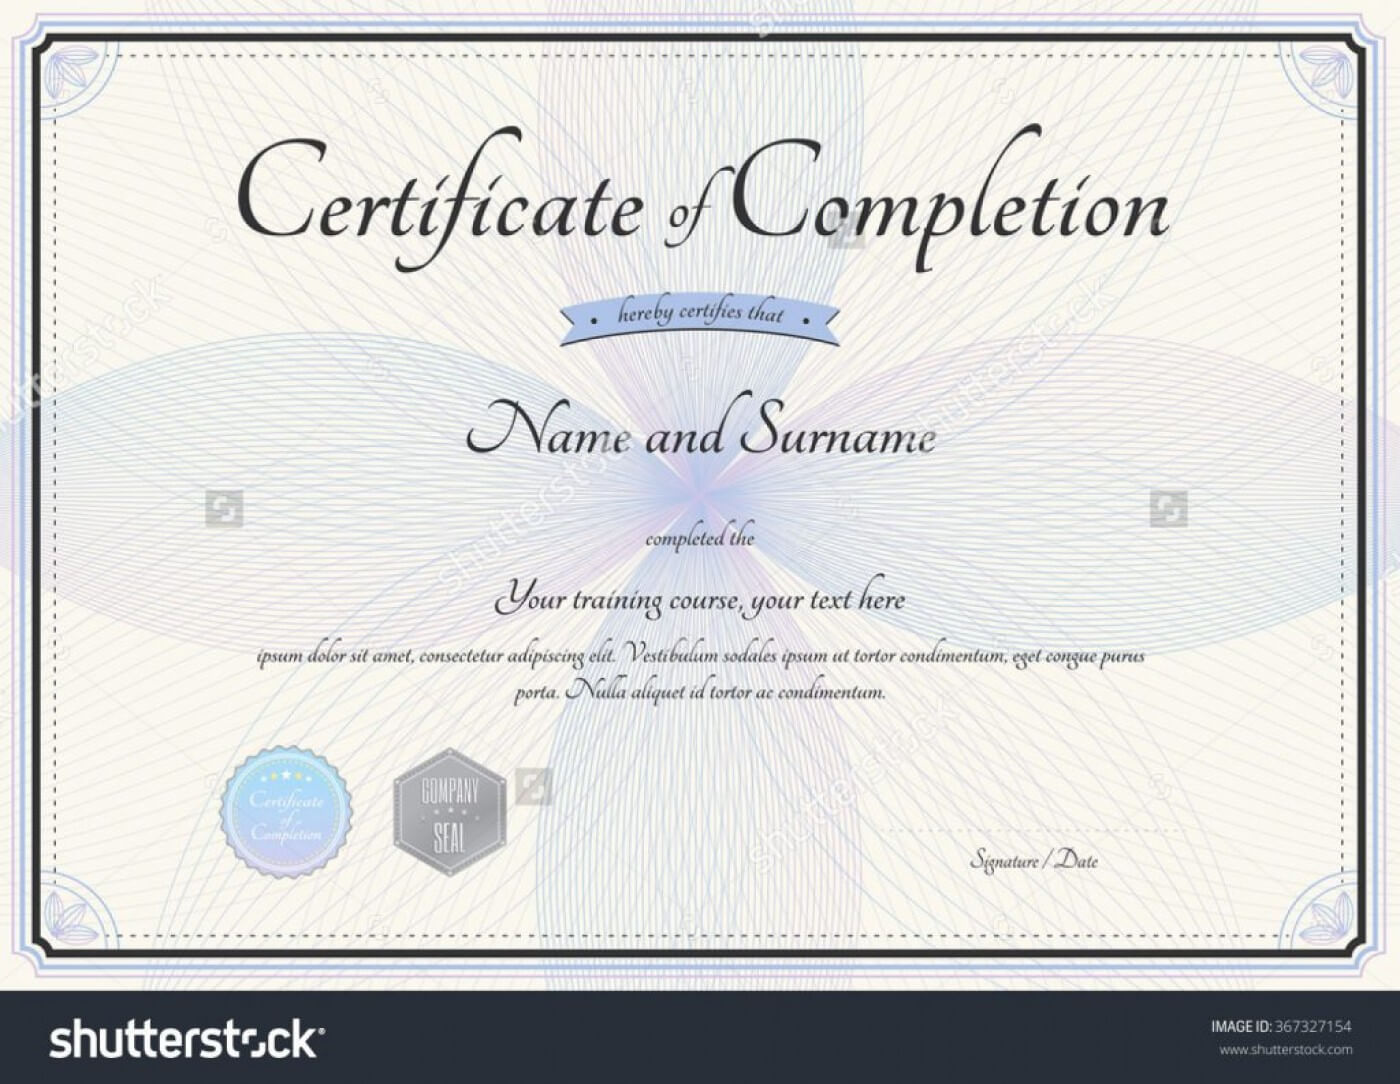 002 Microsoft Word Certificate Of Completion Template Free Within Certificate Of Completion Free Template Word